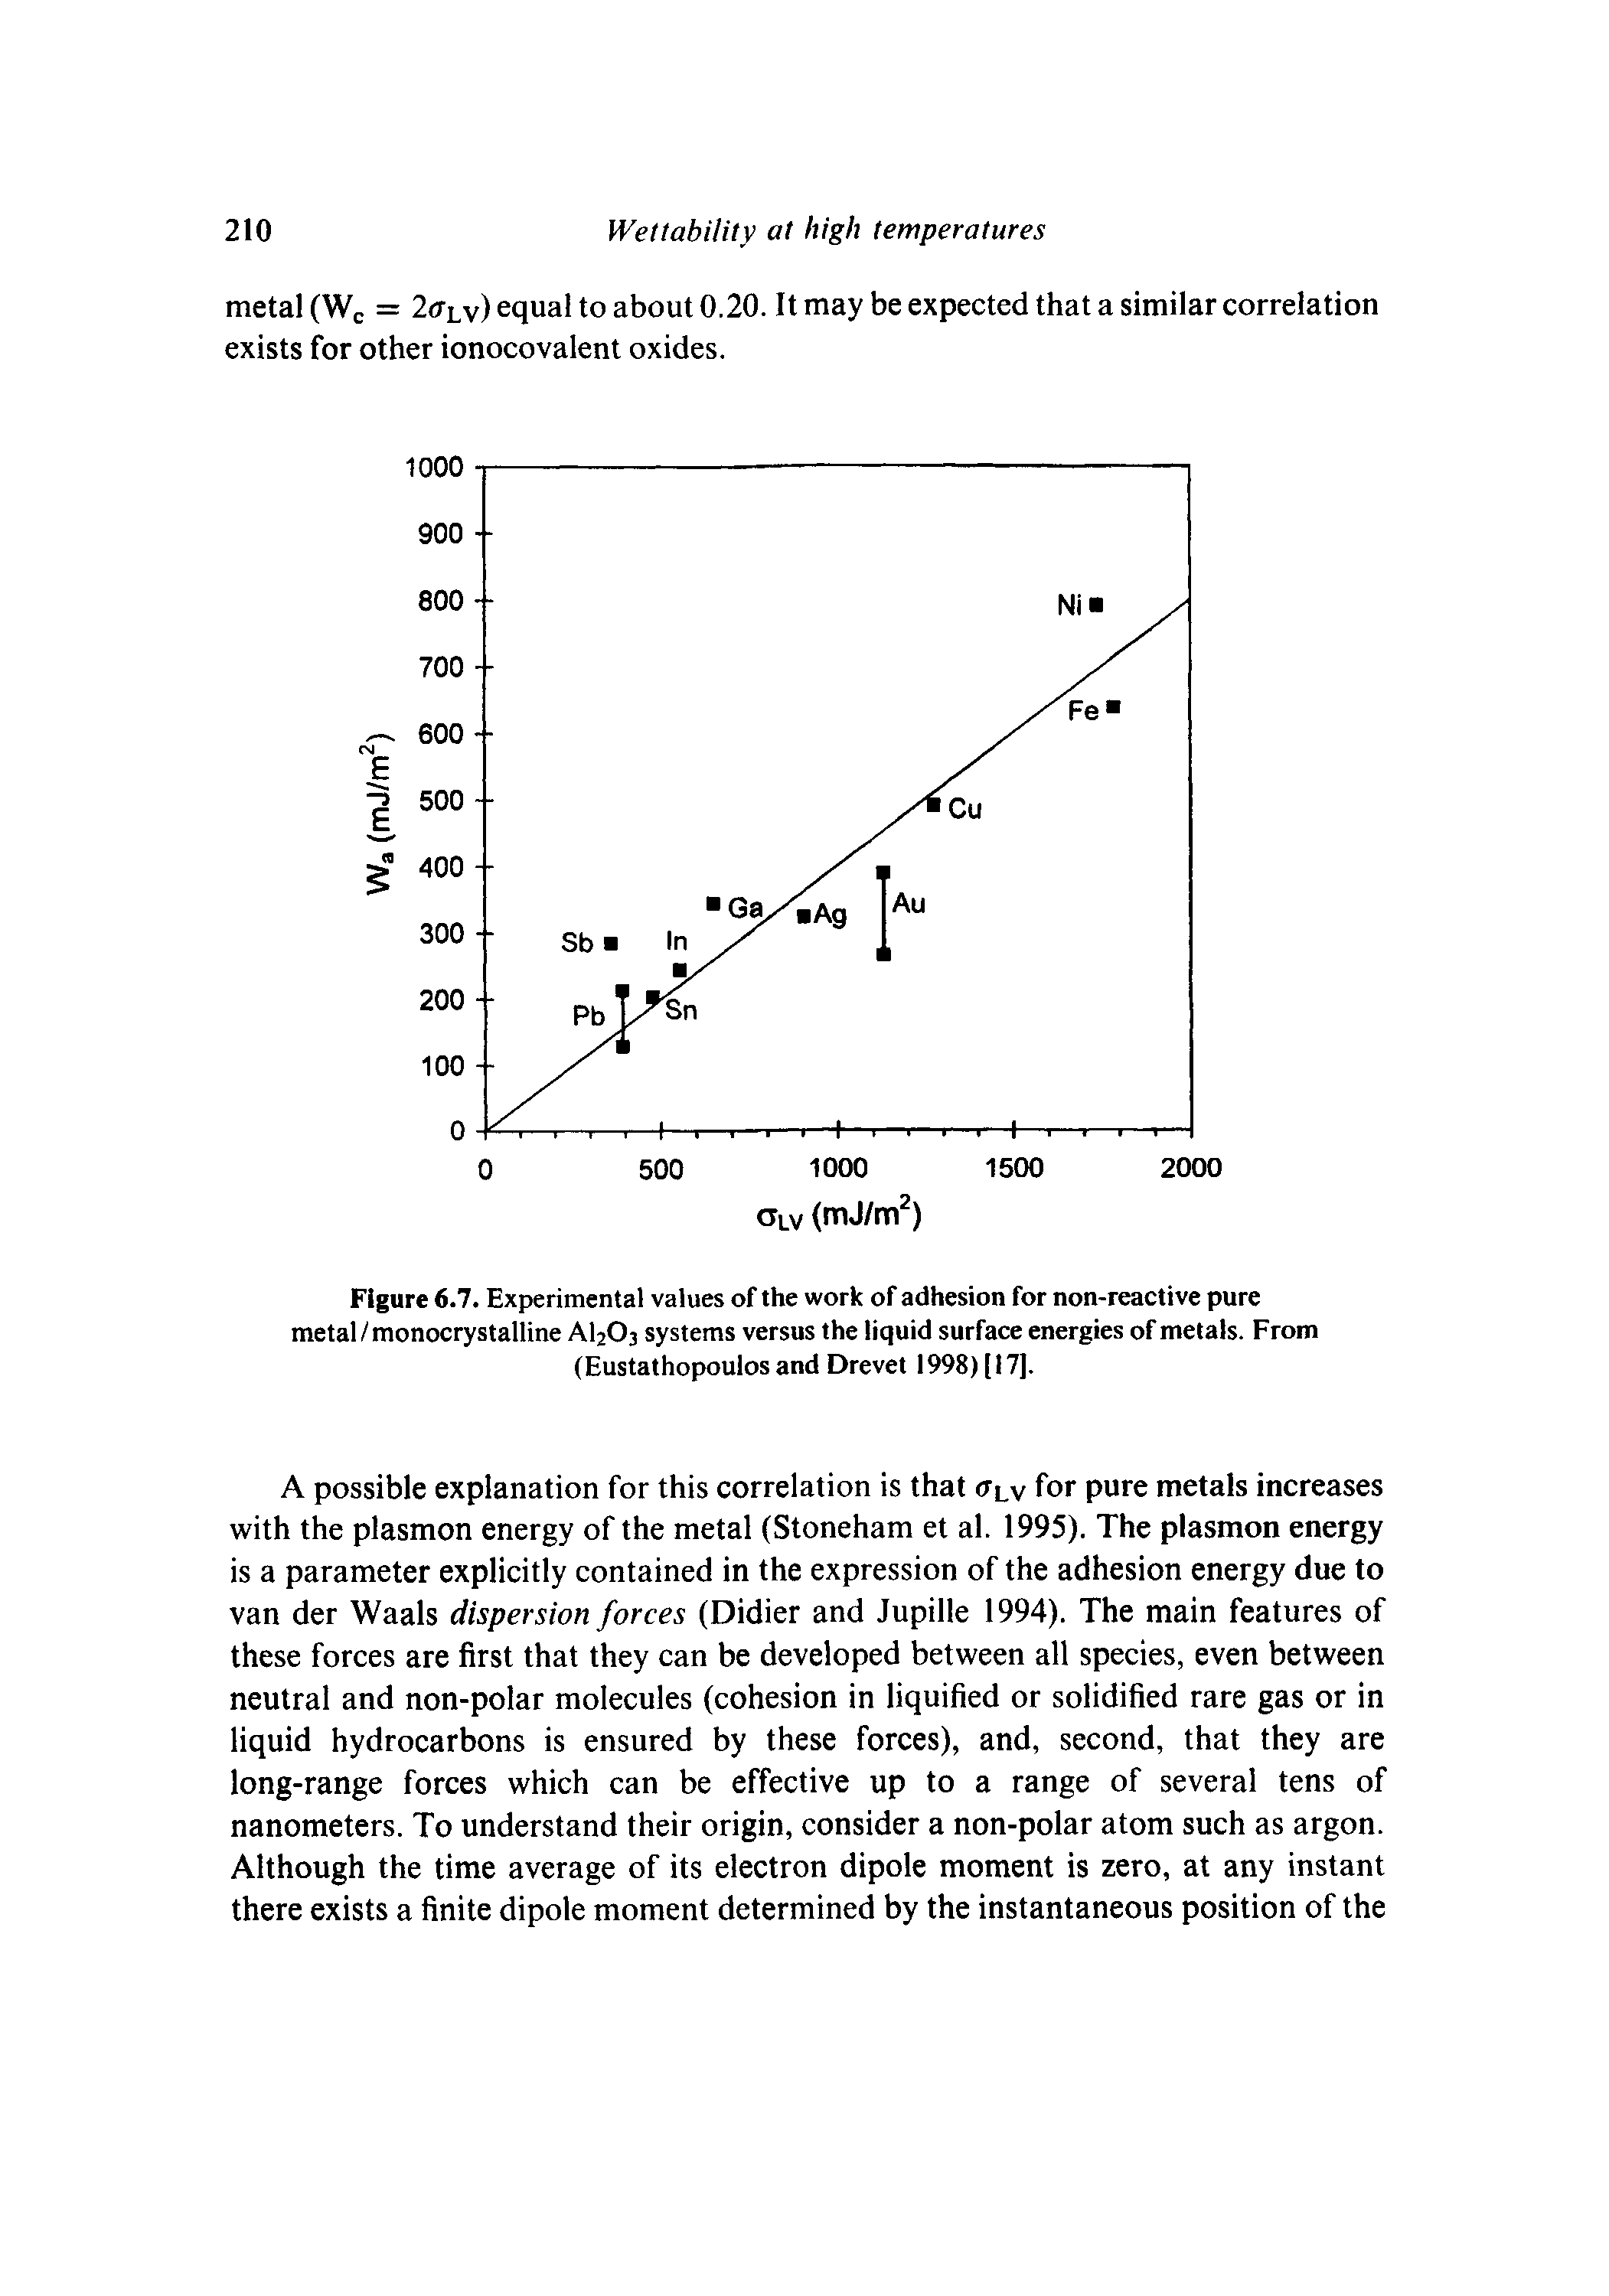 Figure 6.7. Experimental values of the work of adhesion for non-reactive pure metal/monocrystalline AI2O3 systems versus the liquid surface energies of metals. From (Eustathopoulos and Drevet 1998) [17].